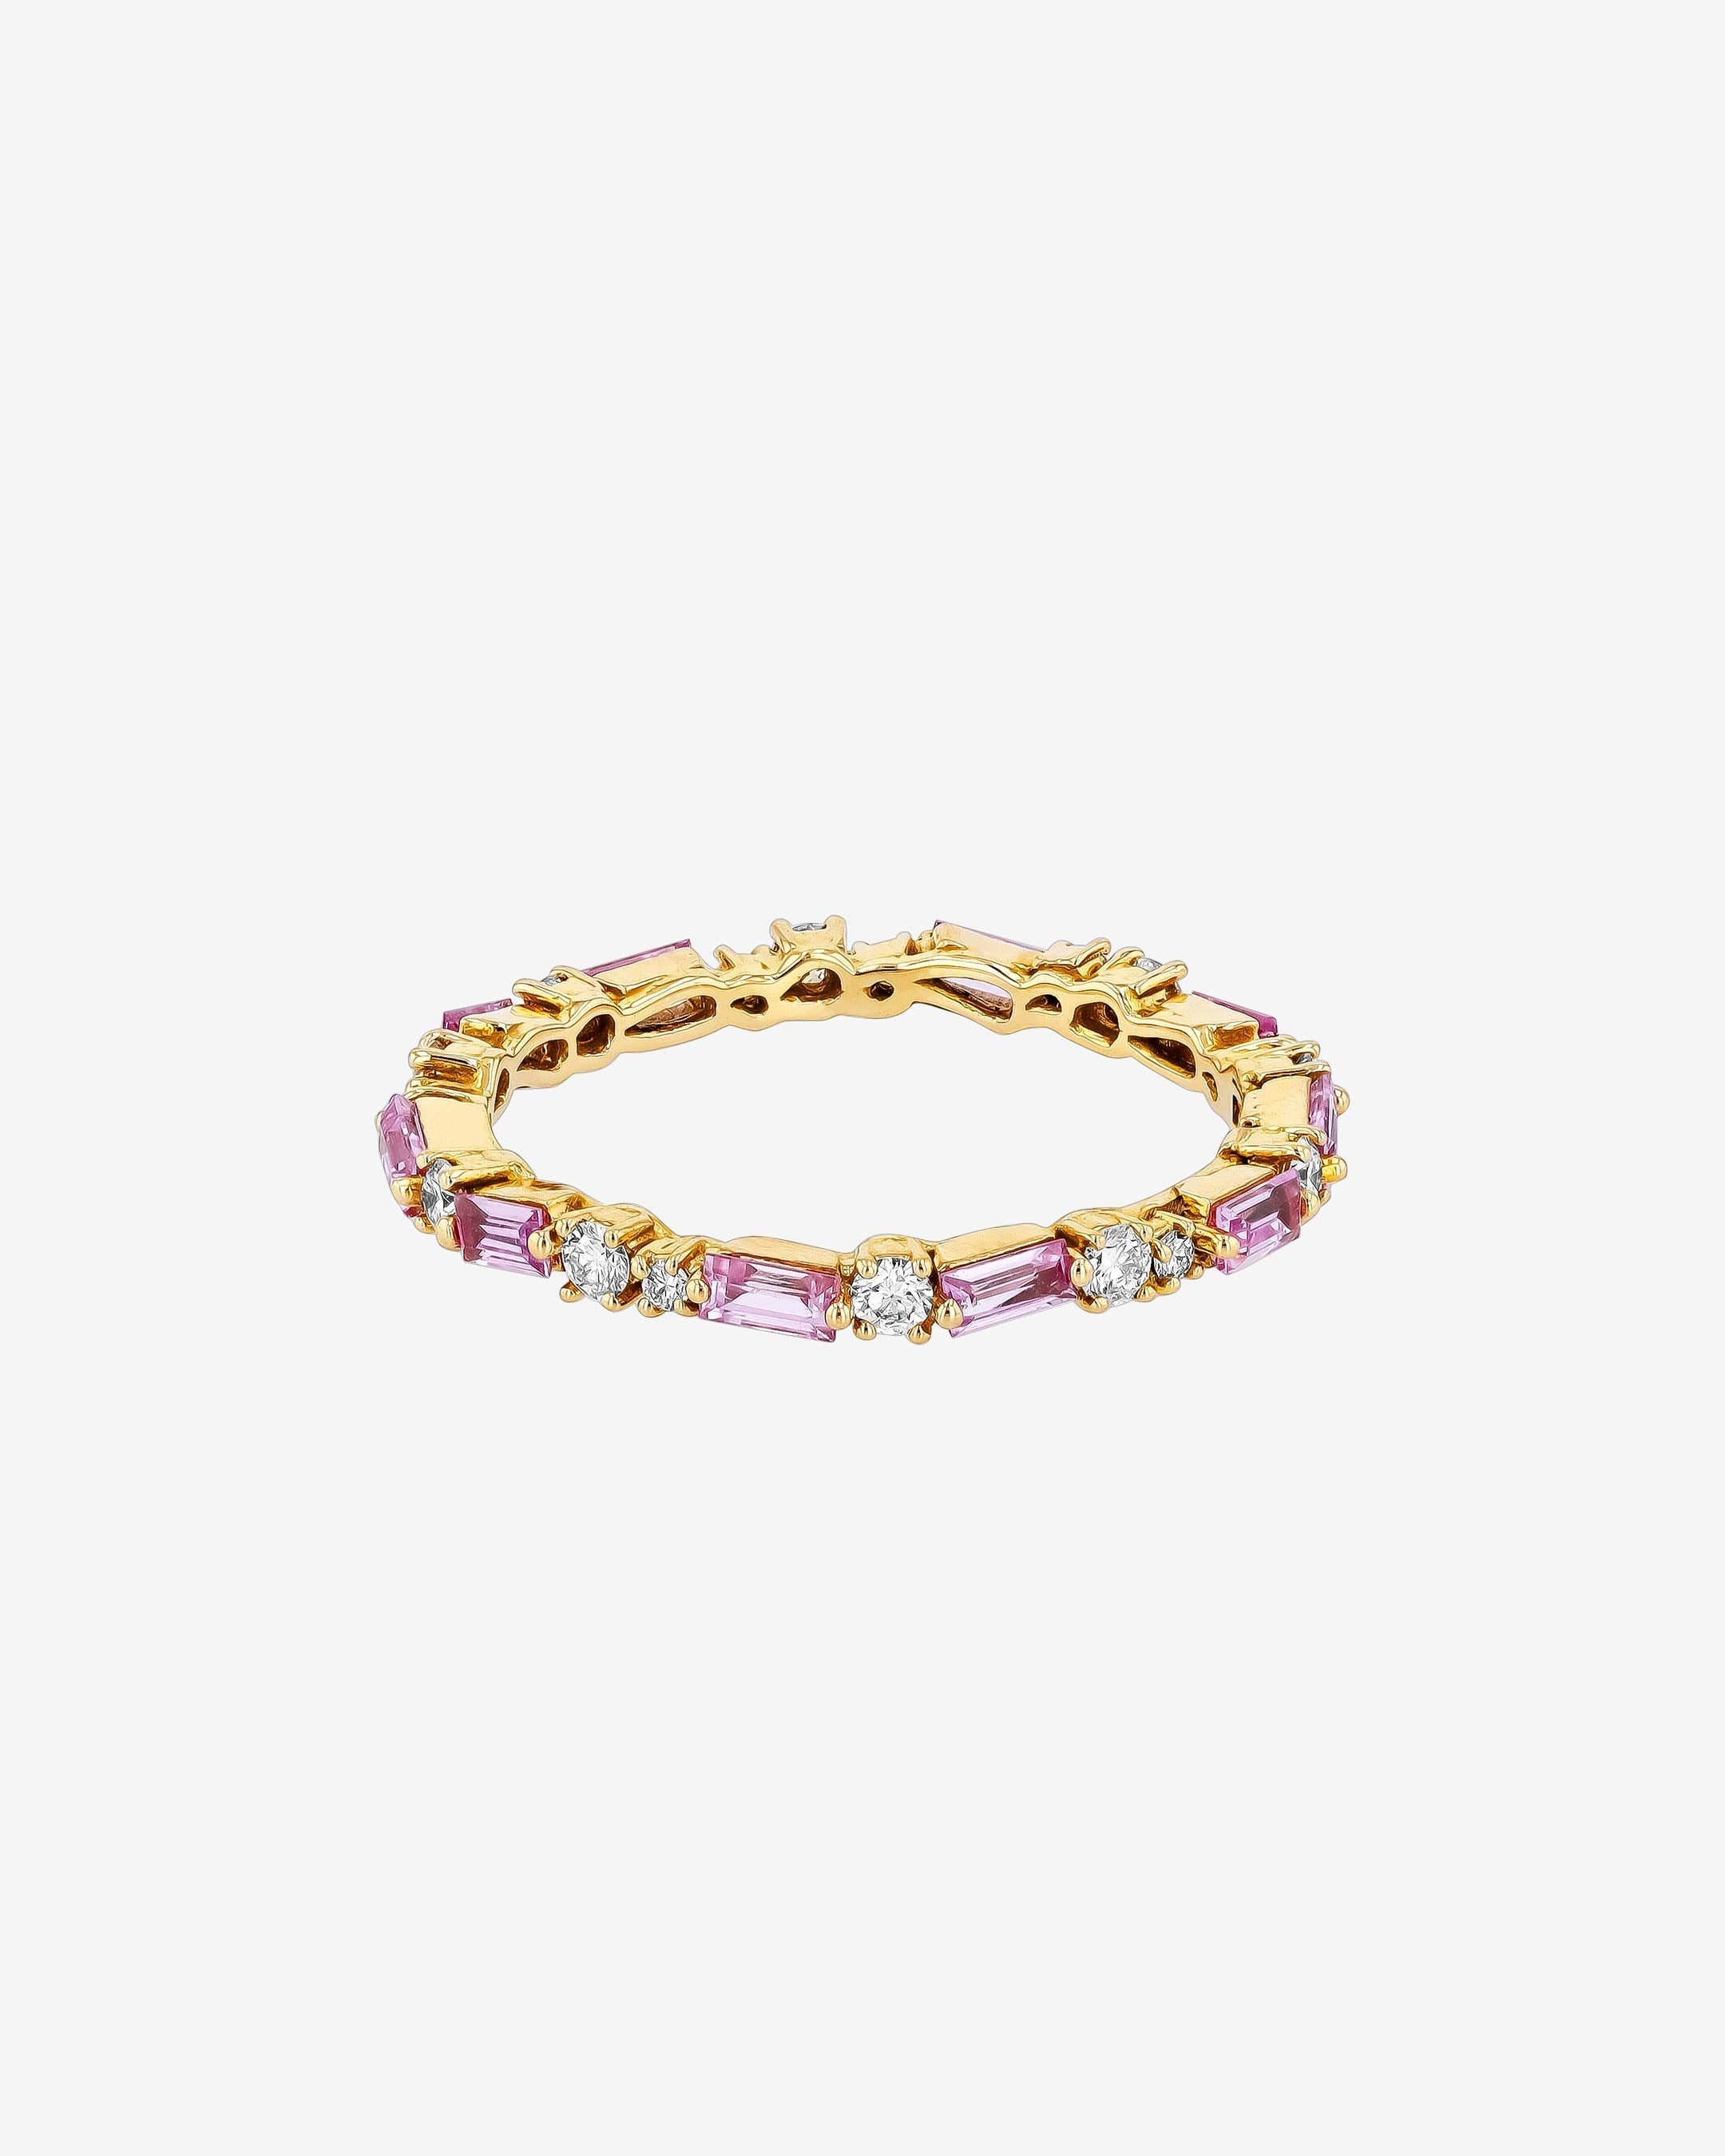 Suzanne Kalan Thin Mix Pink Sapphire Eternity Band in 18k yellow gold